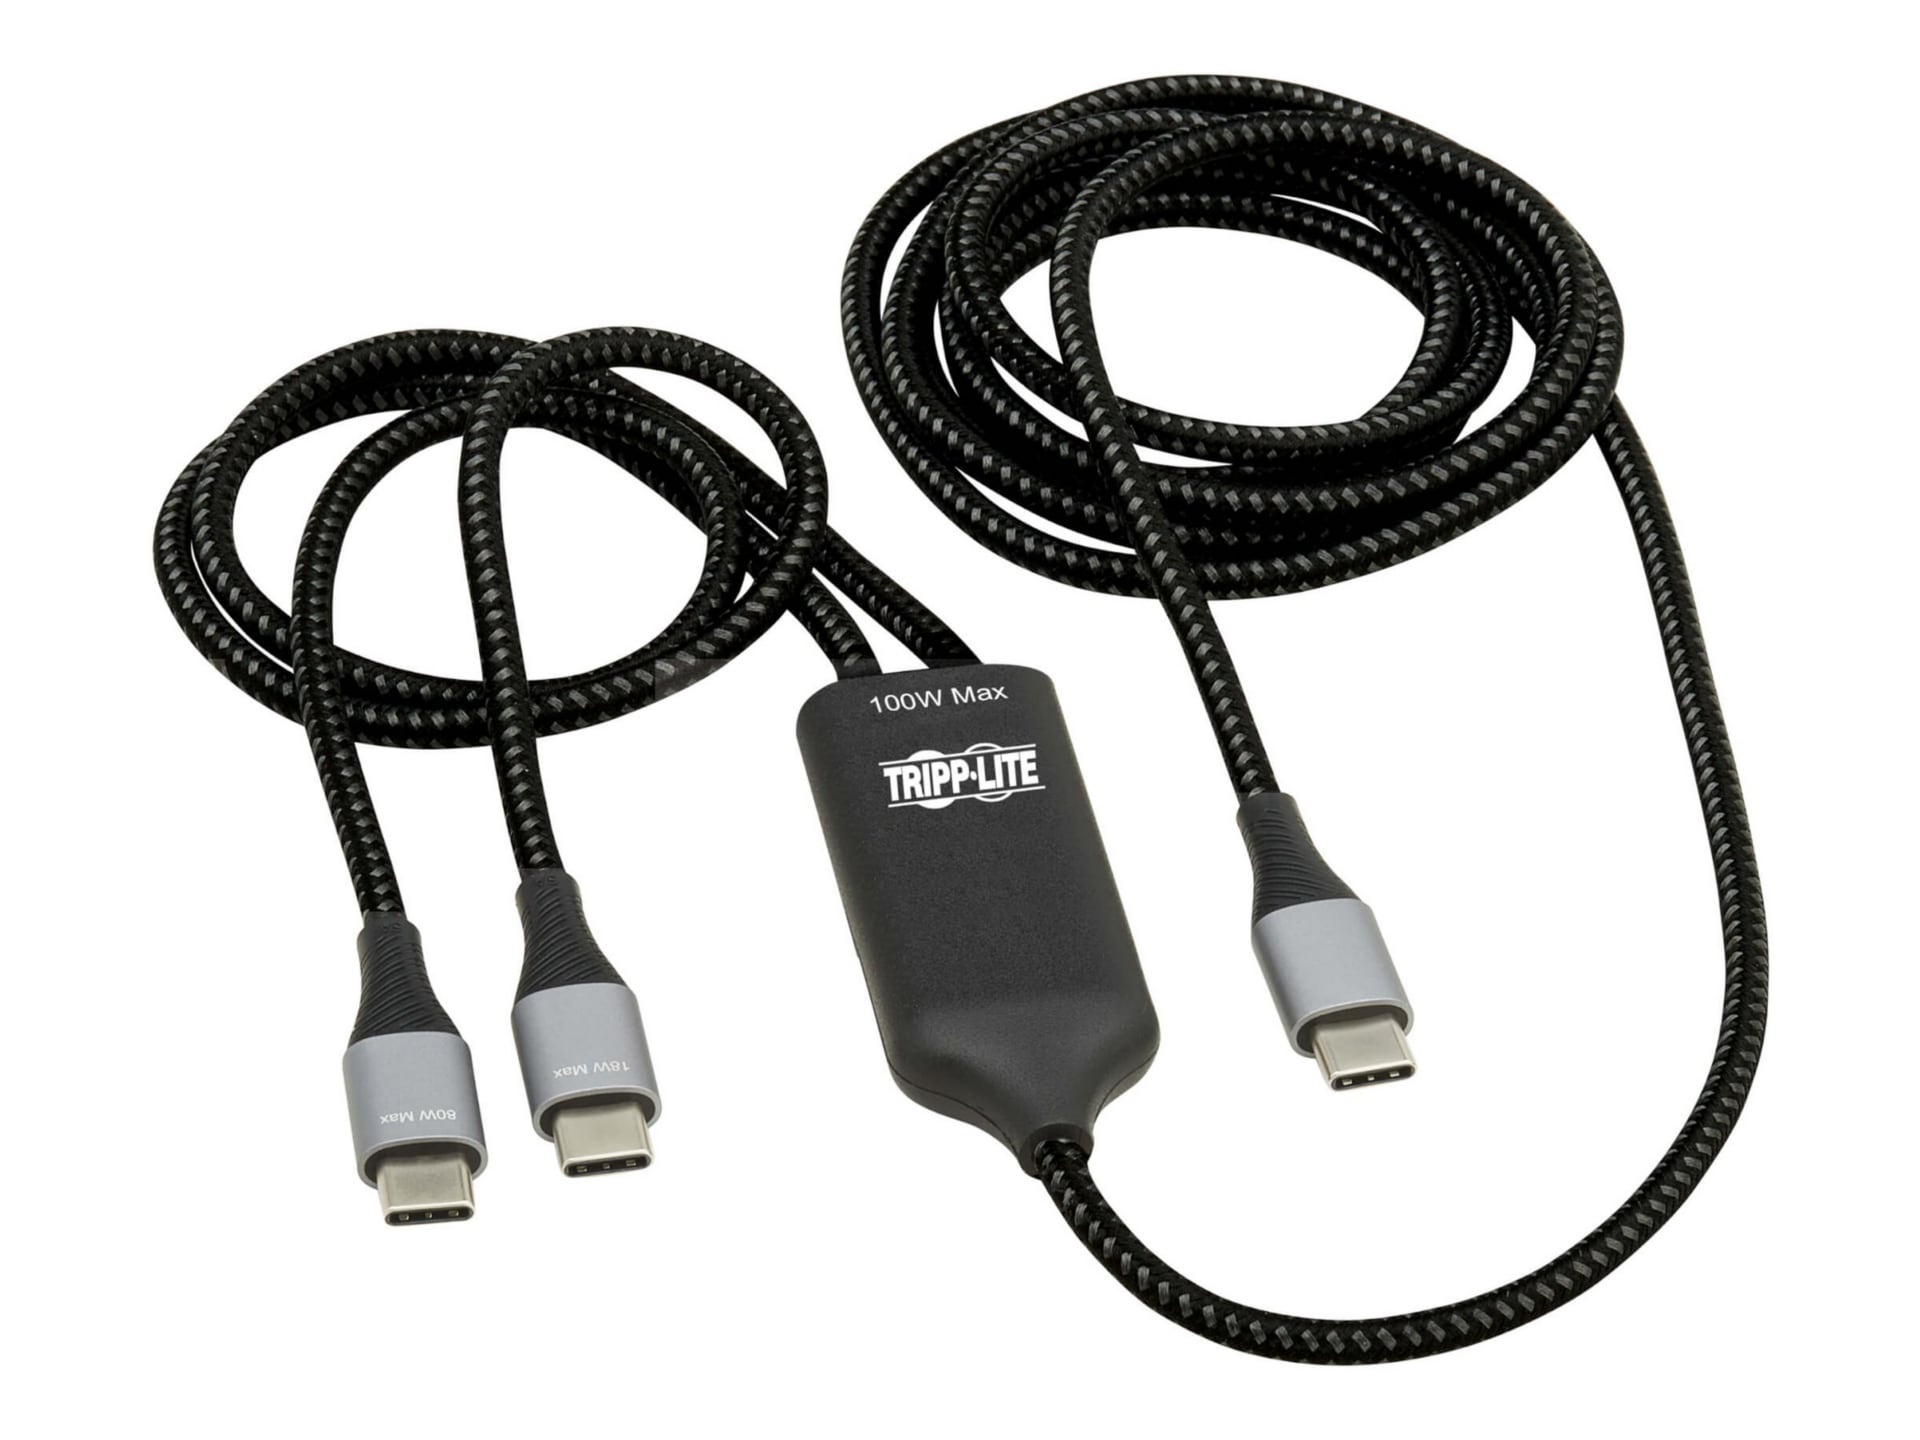 Understanding phone USB cables types, charger vs data transfer cable 